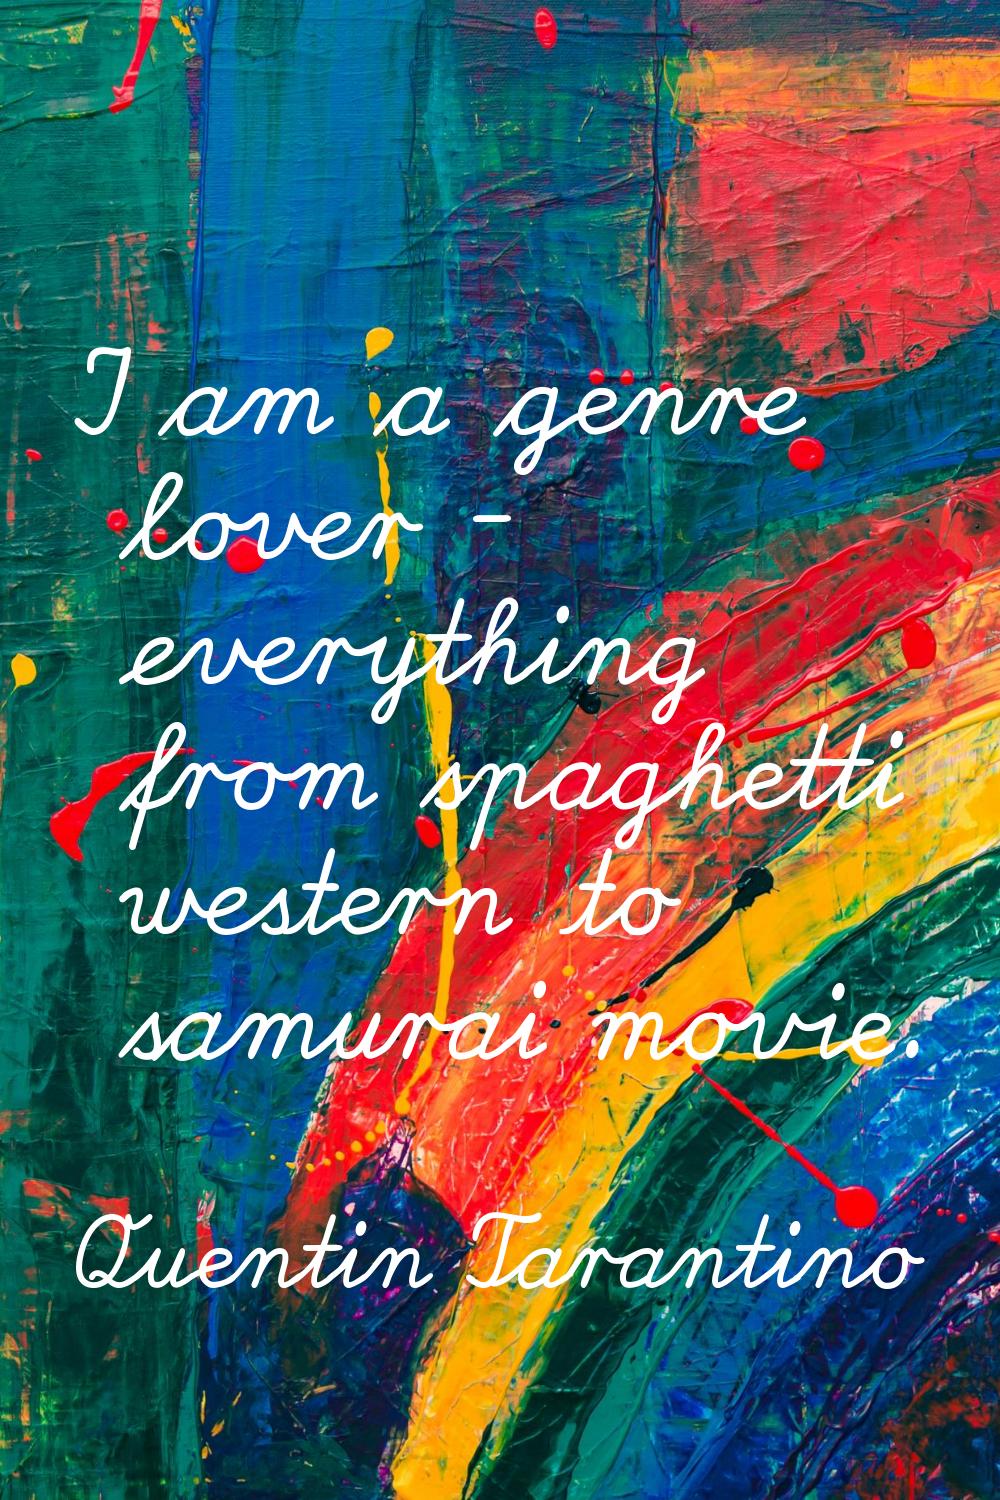 I am a genre lover - everything from spaghetti western to samurai movie.